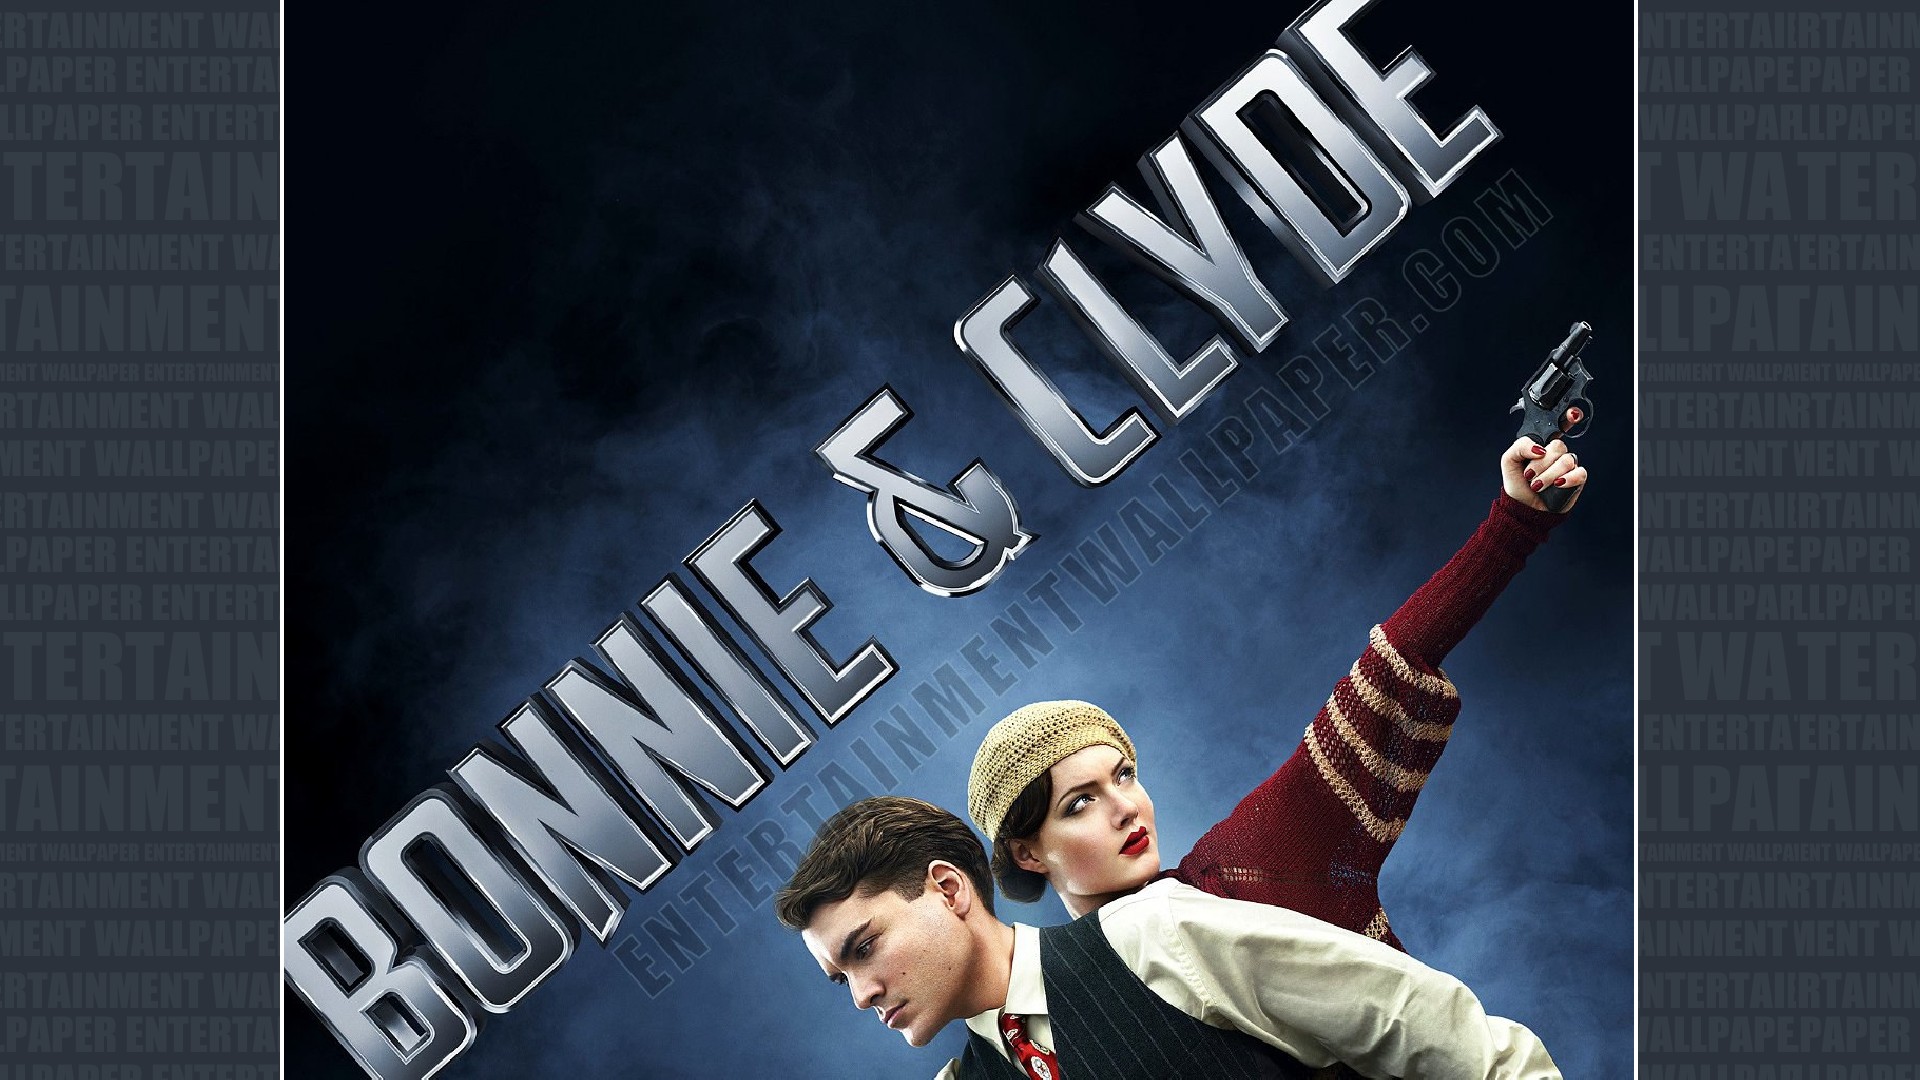 Like Or Share Bonnie And Clyde Wallpaper On